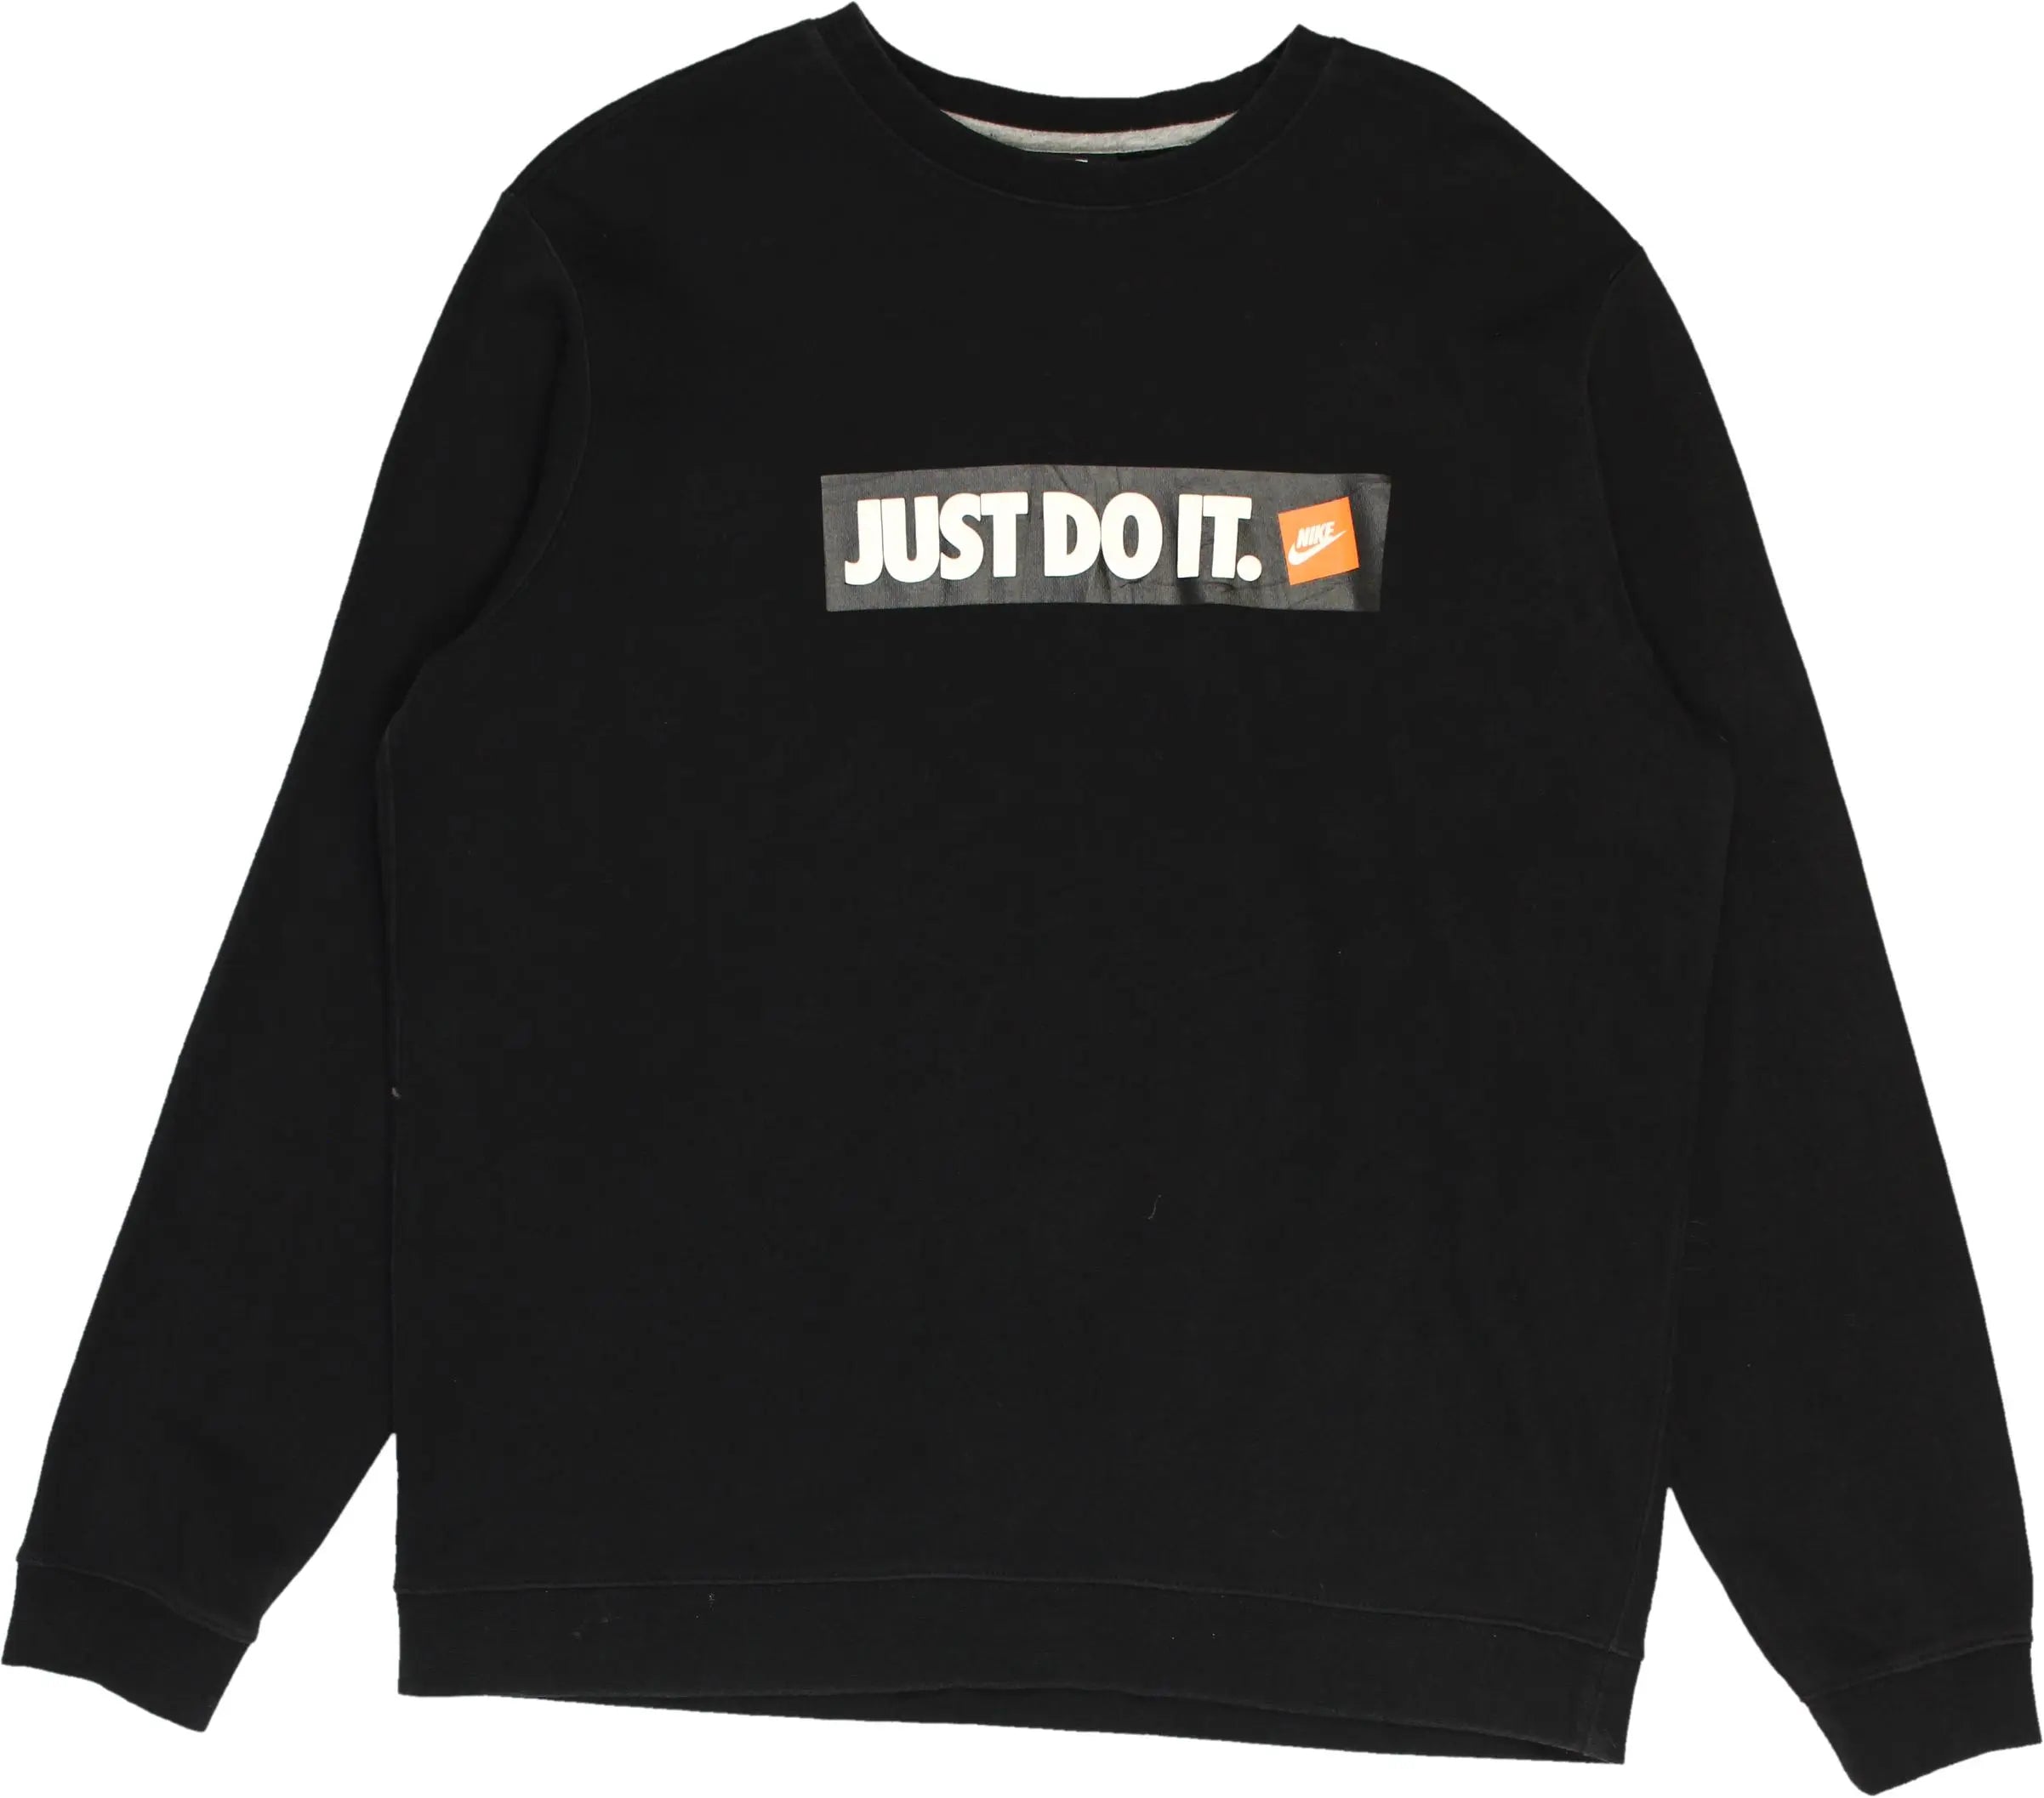 Nike - Black Nike sweater- ThriftTale.com - Vintage and second handclothing